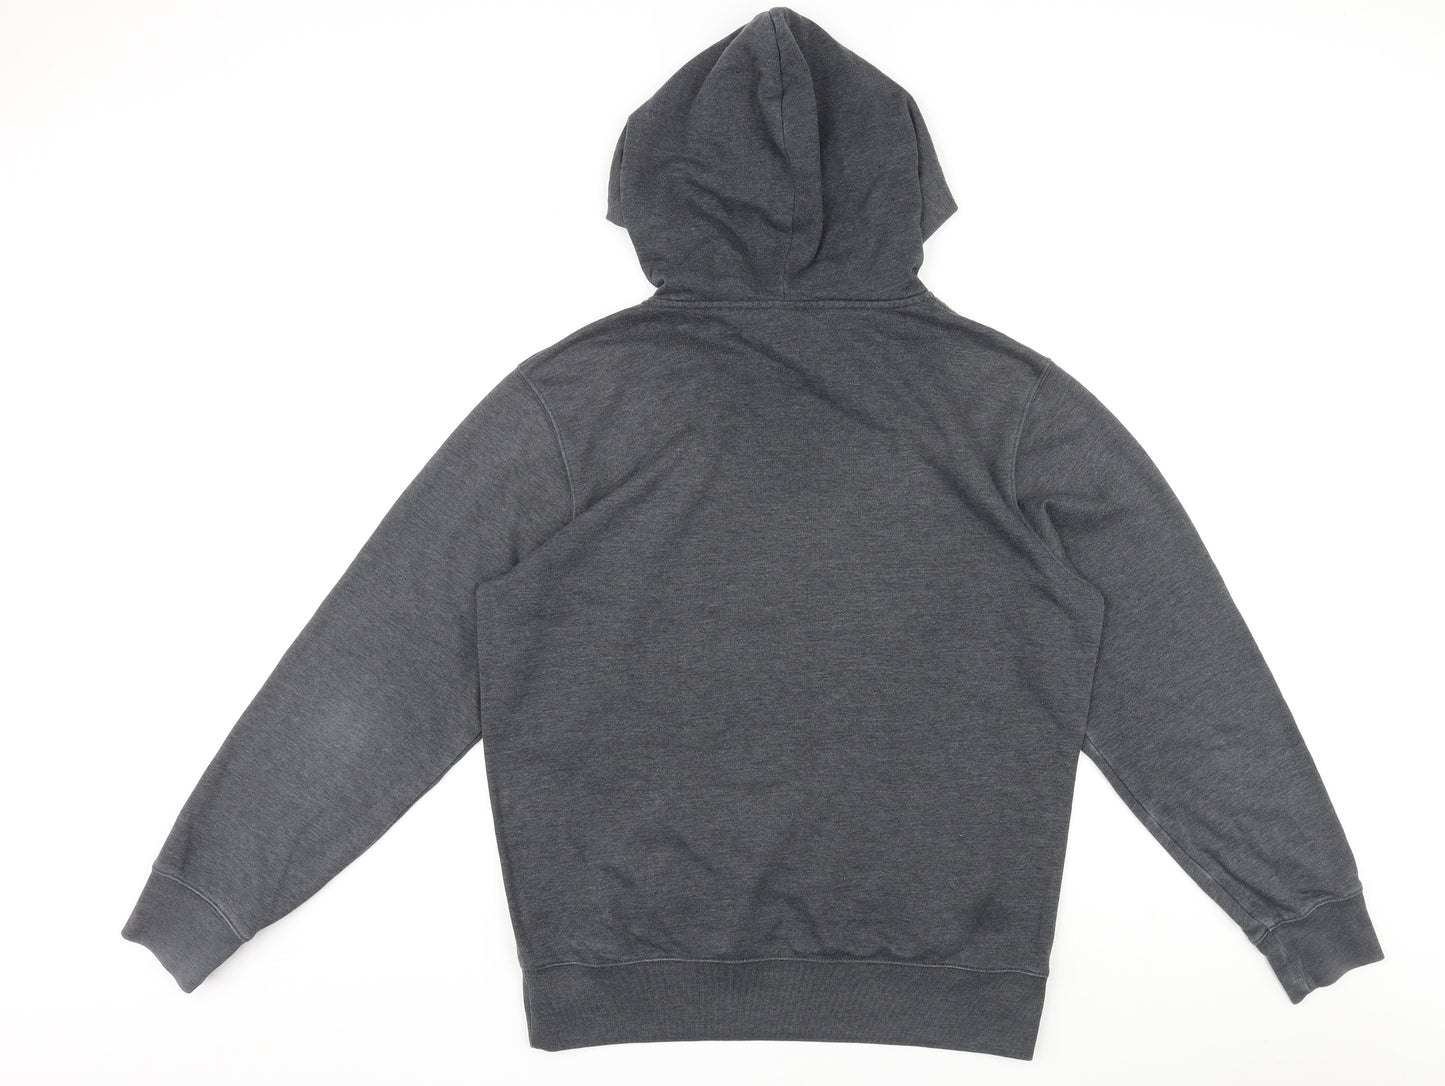 Russell Athletic Mens Grey Polyester Pullover Hoodie Size M - Logo, Pocket, Drawstring